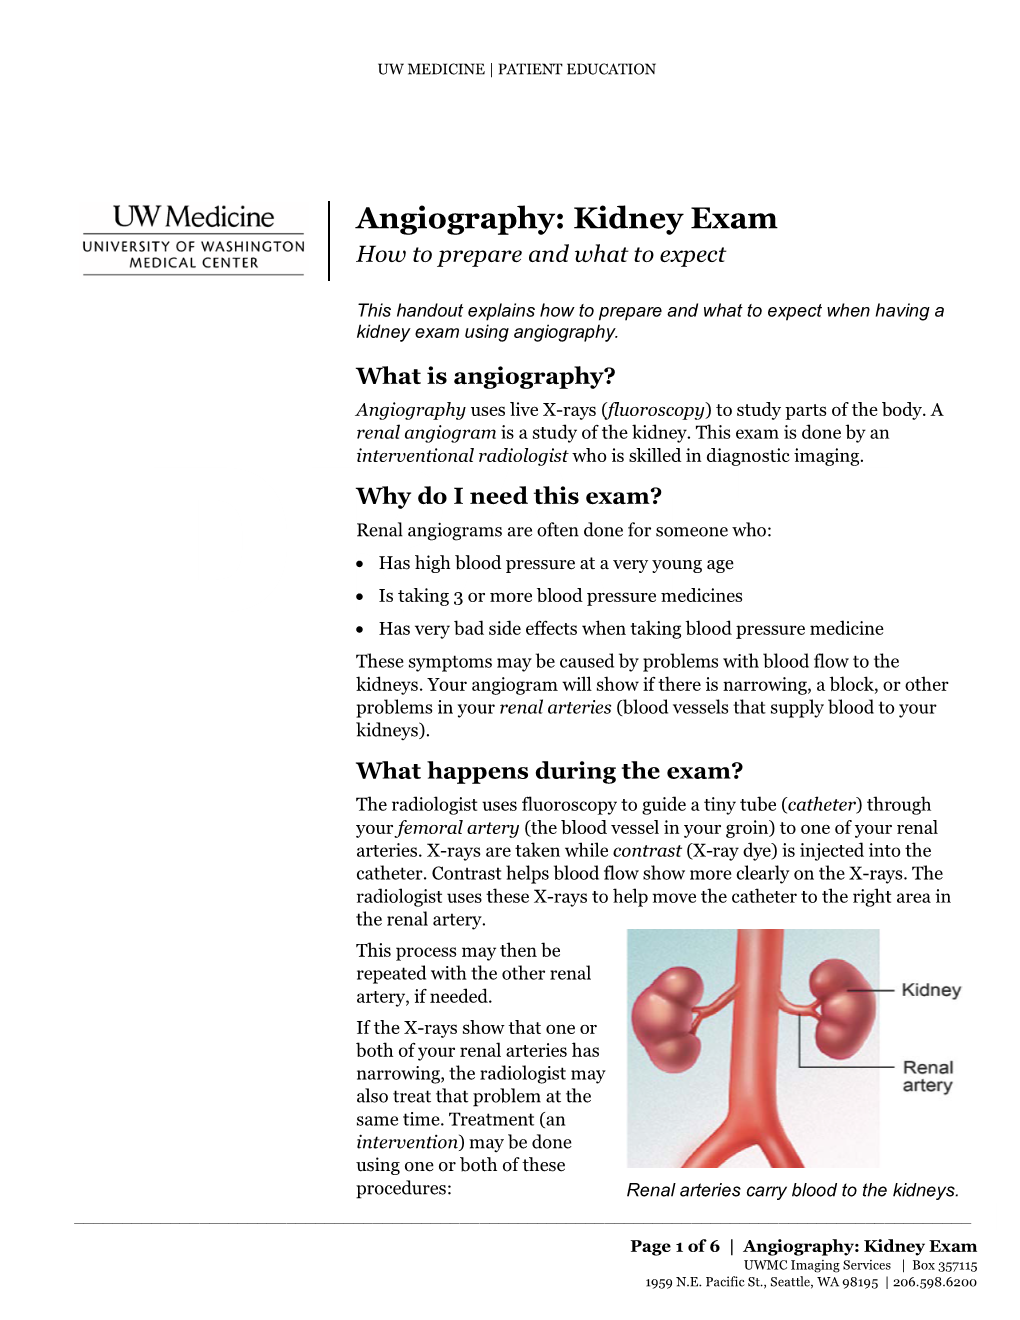 Angiography: Kidney Exam | How to Prepare and What to Expect | This Handout Explains How to Prepare and What to Expect When Having a Kidney Exam Using Angiography